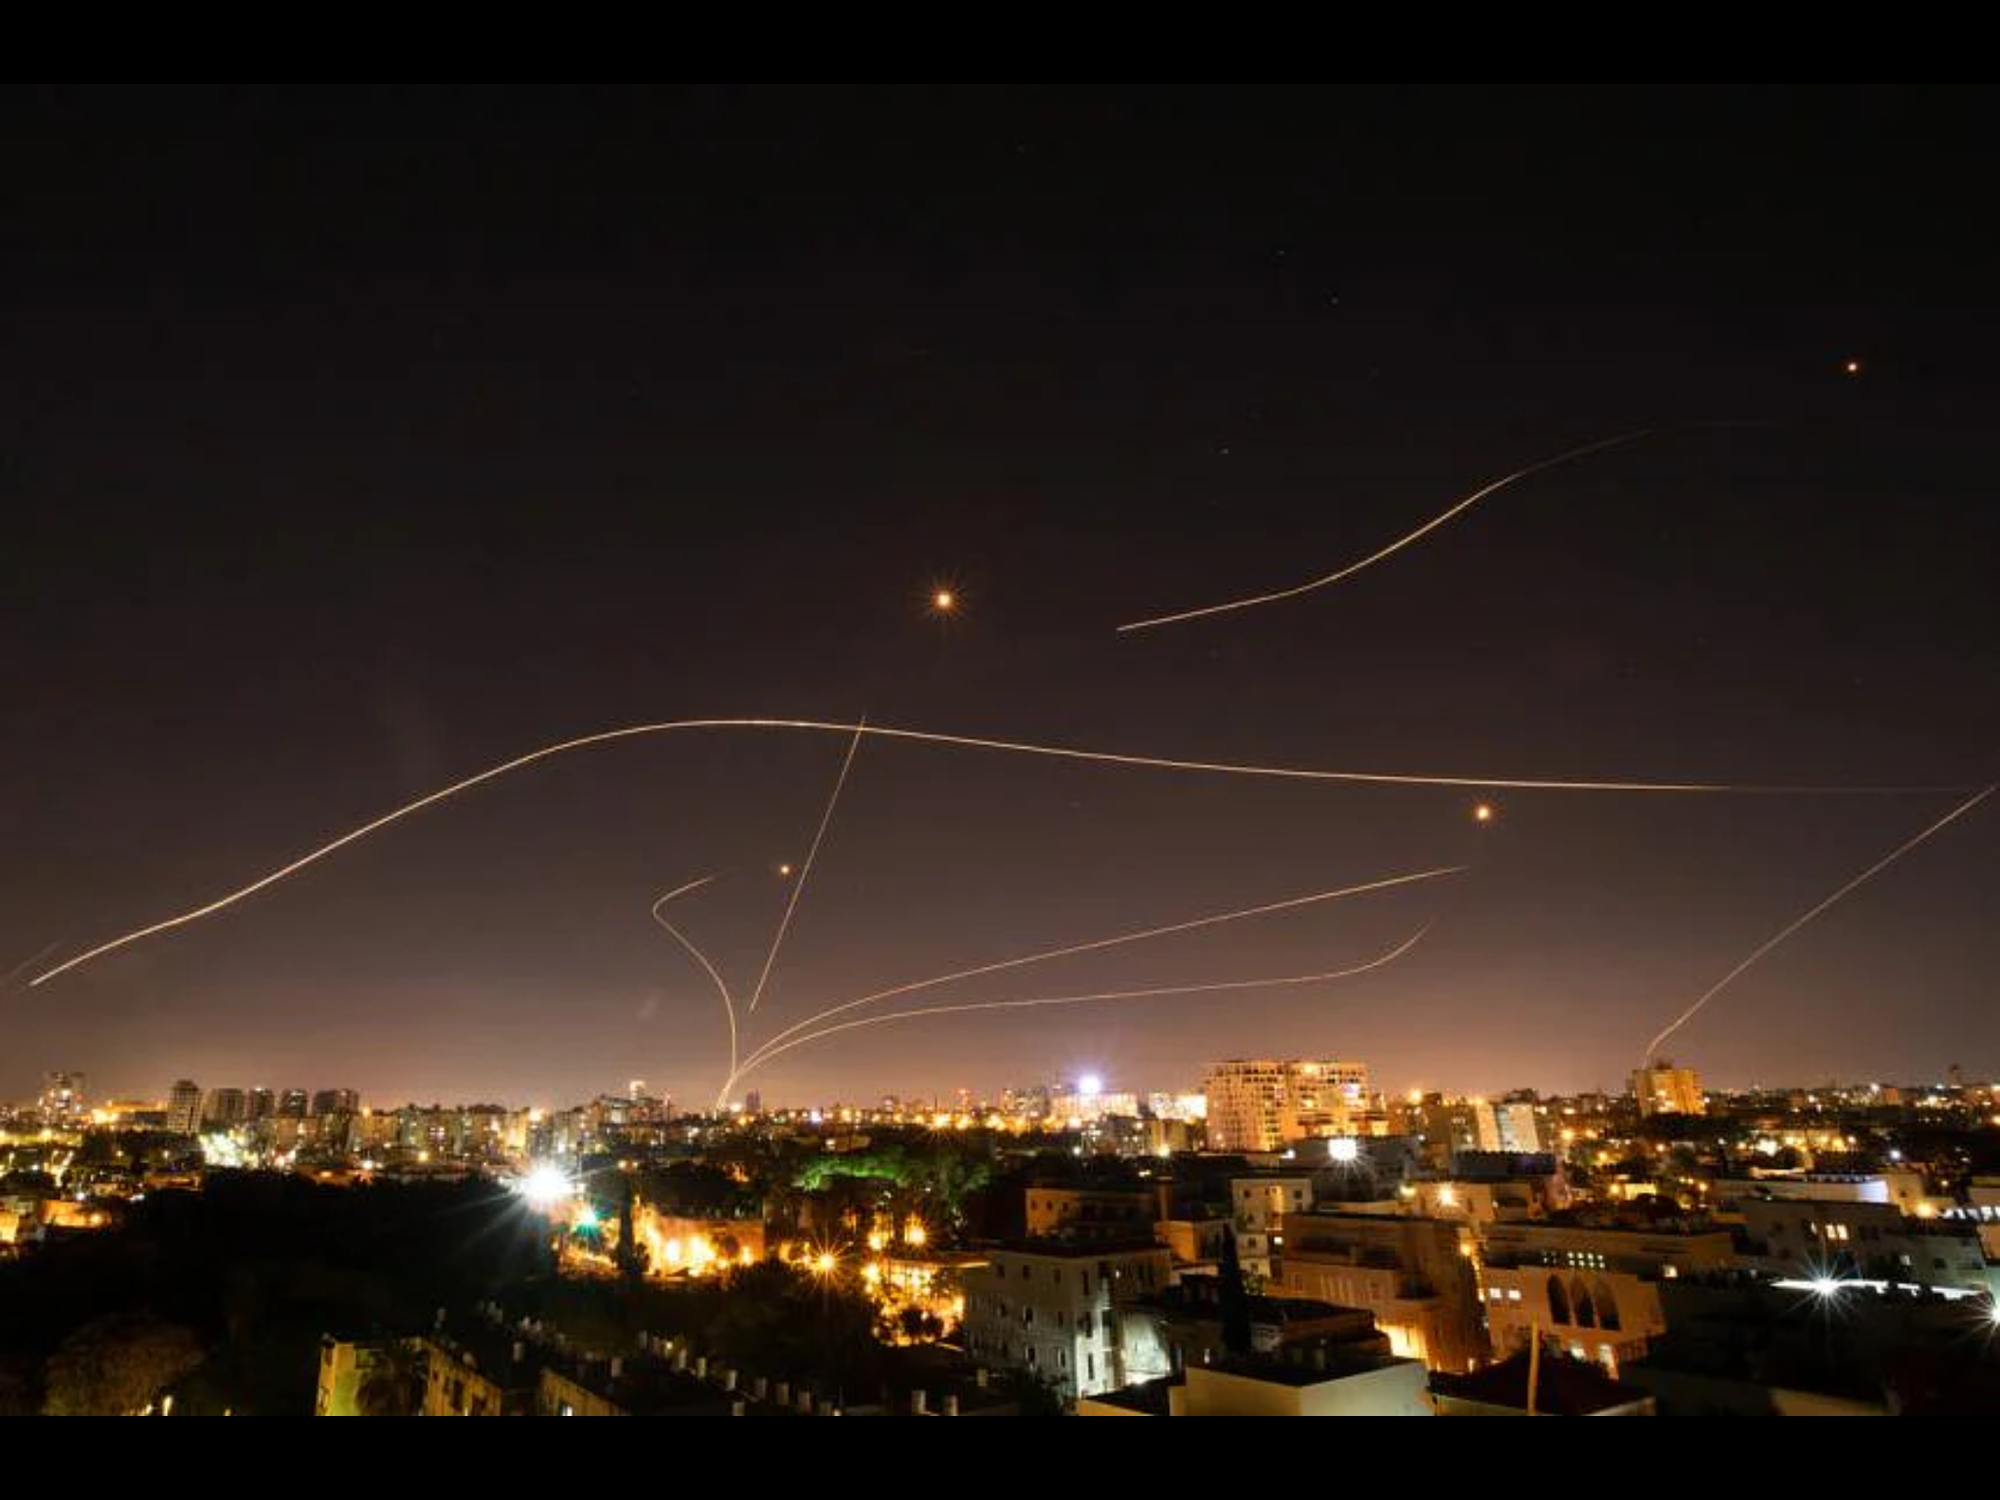 Israel announced pioneering weapons, built a laser wall around the country - Photo 1.